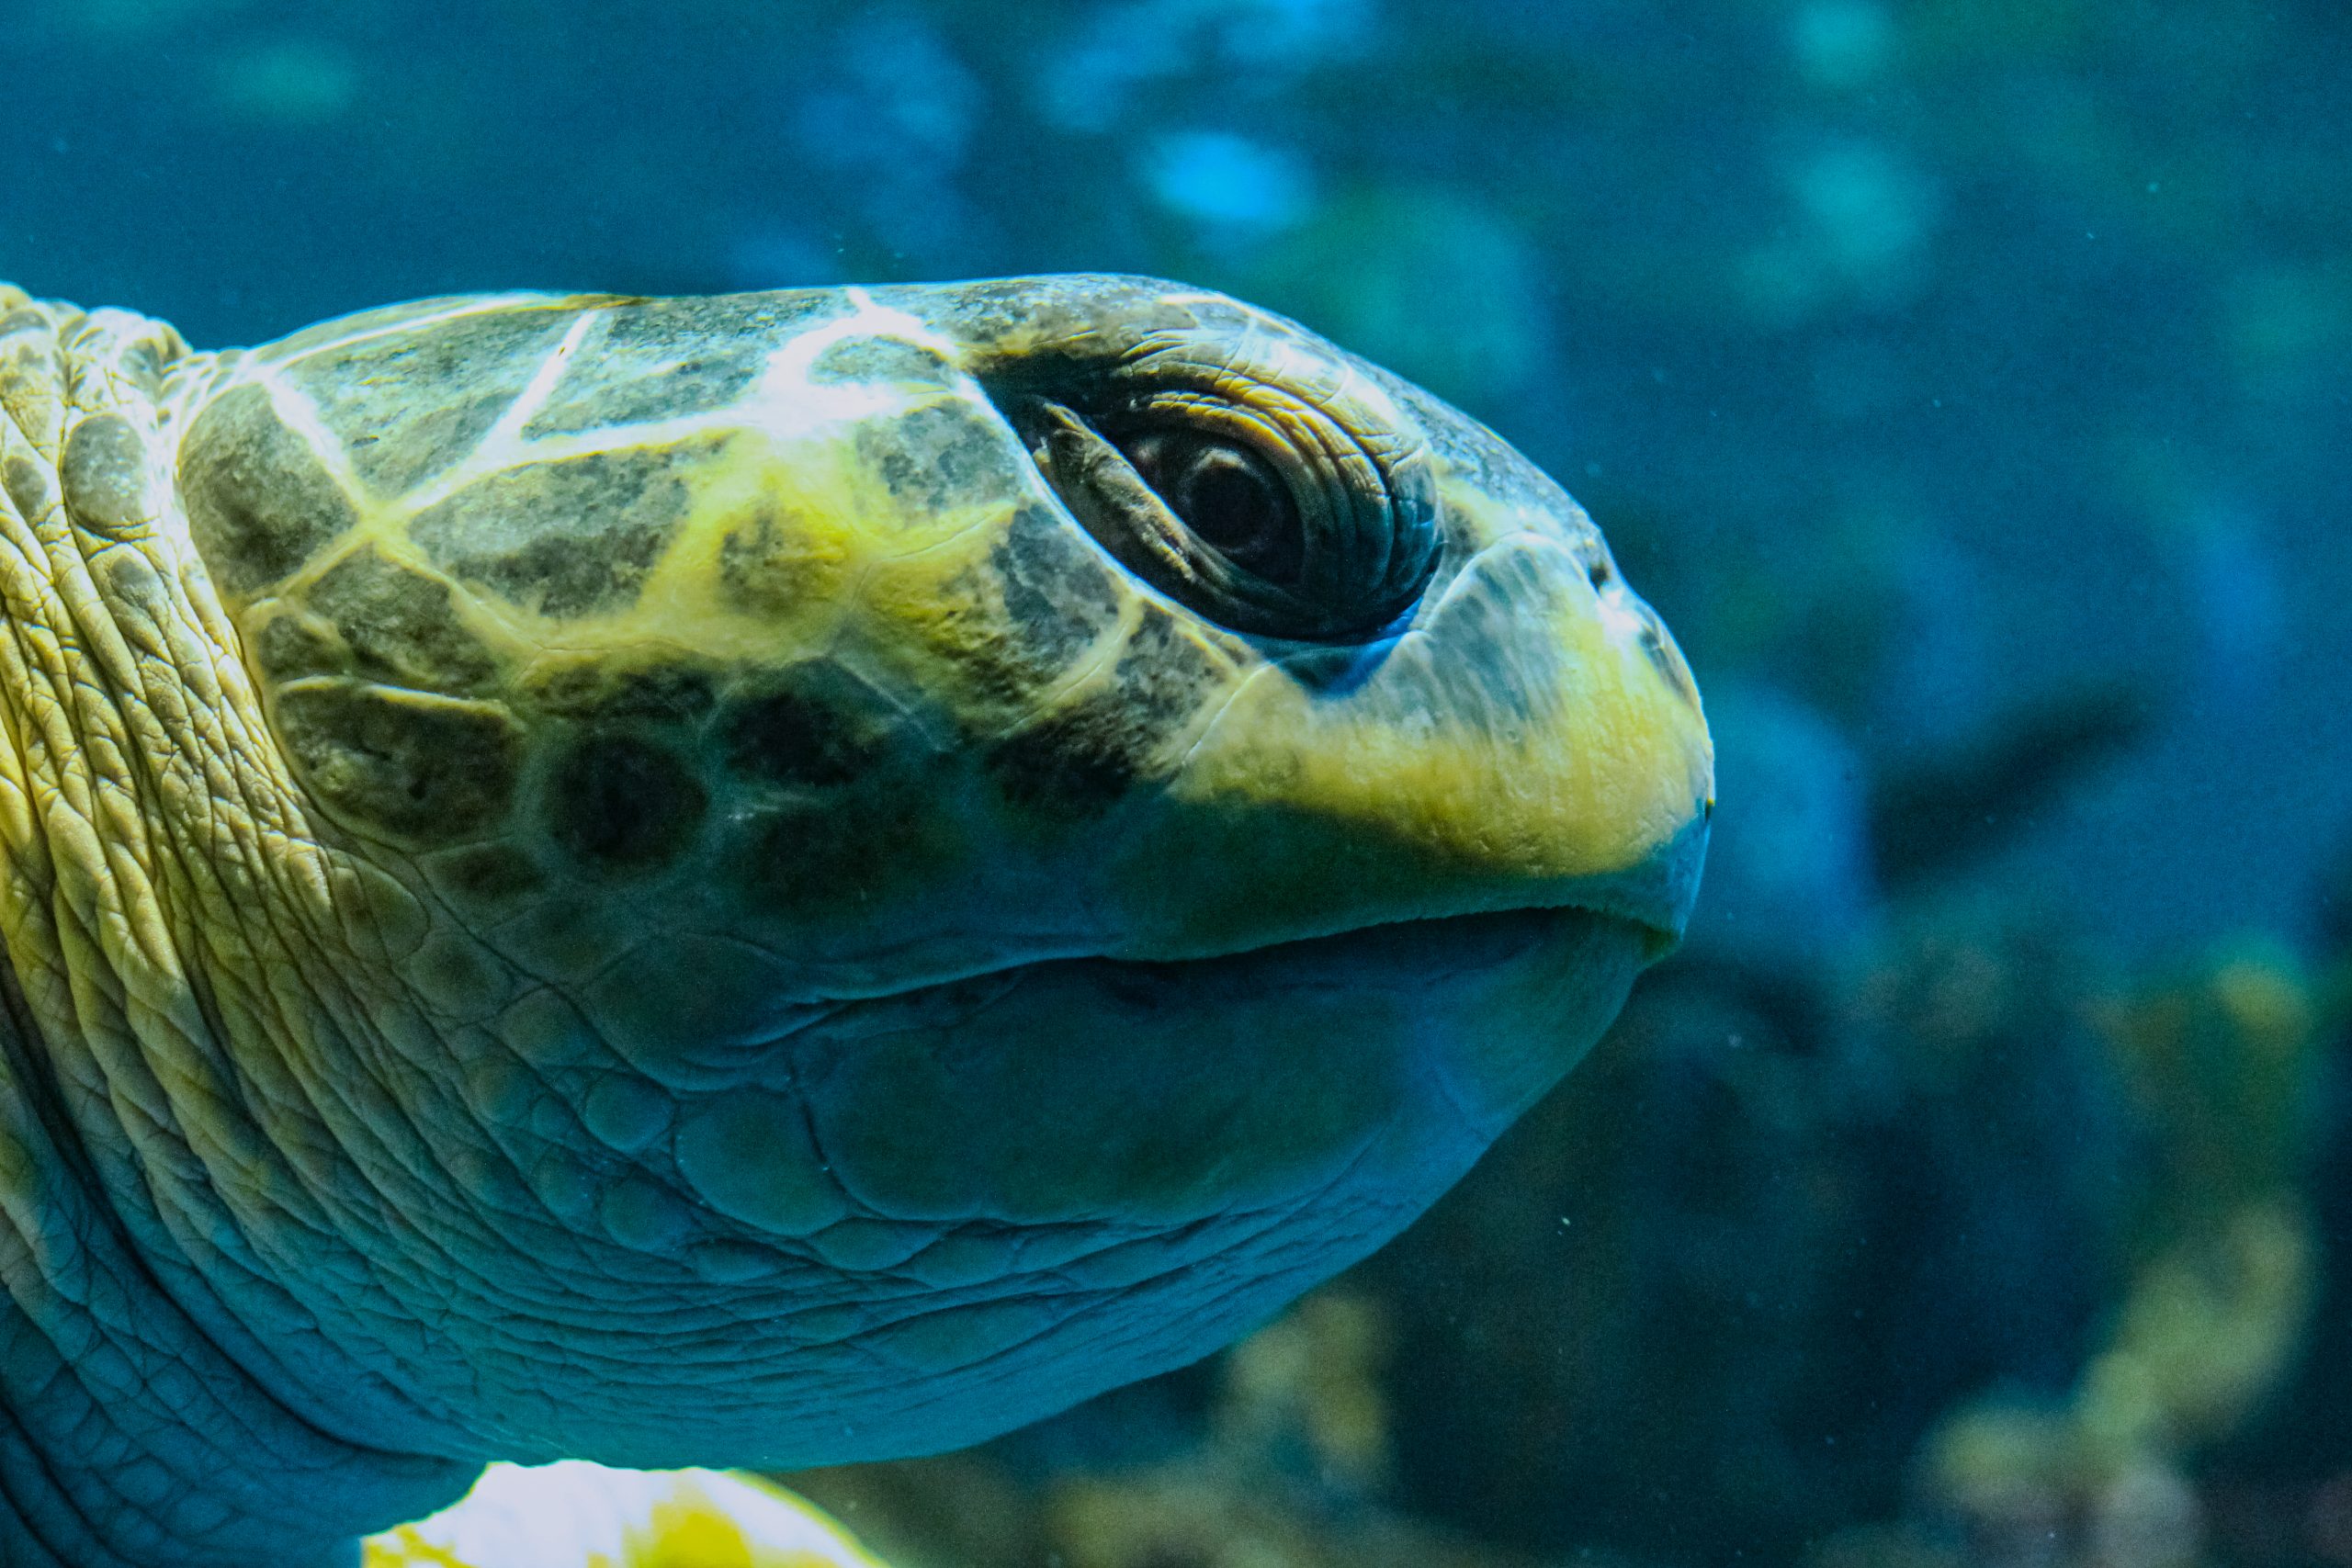 How Do Turtles Age Compared to Humans?